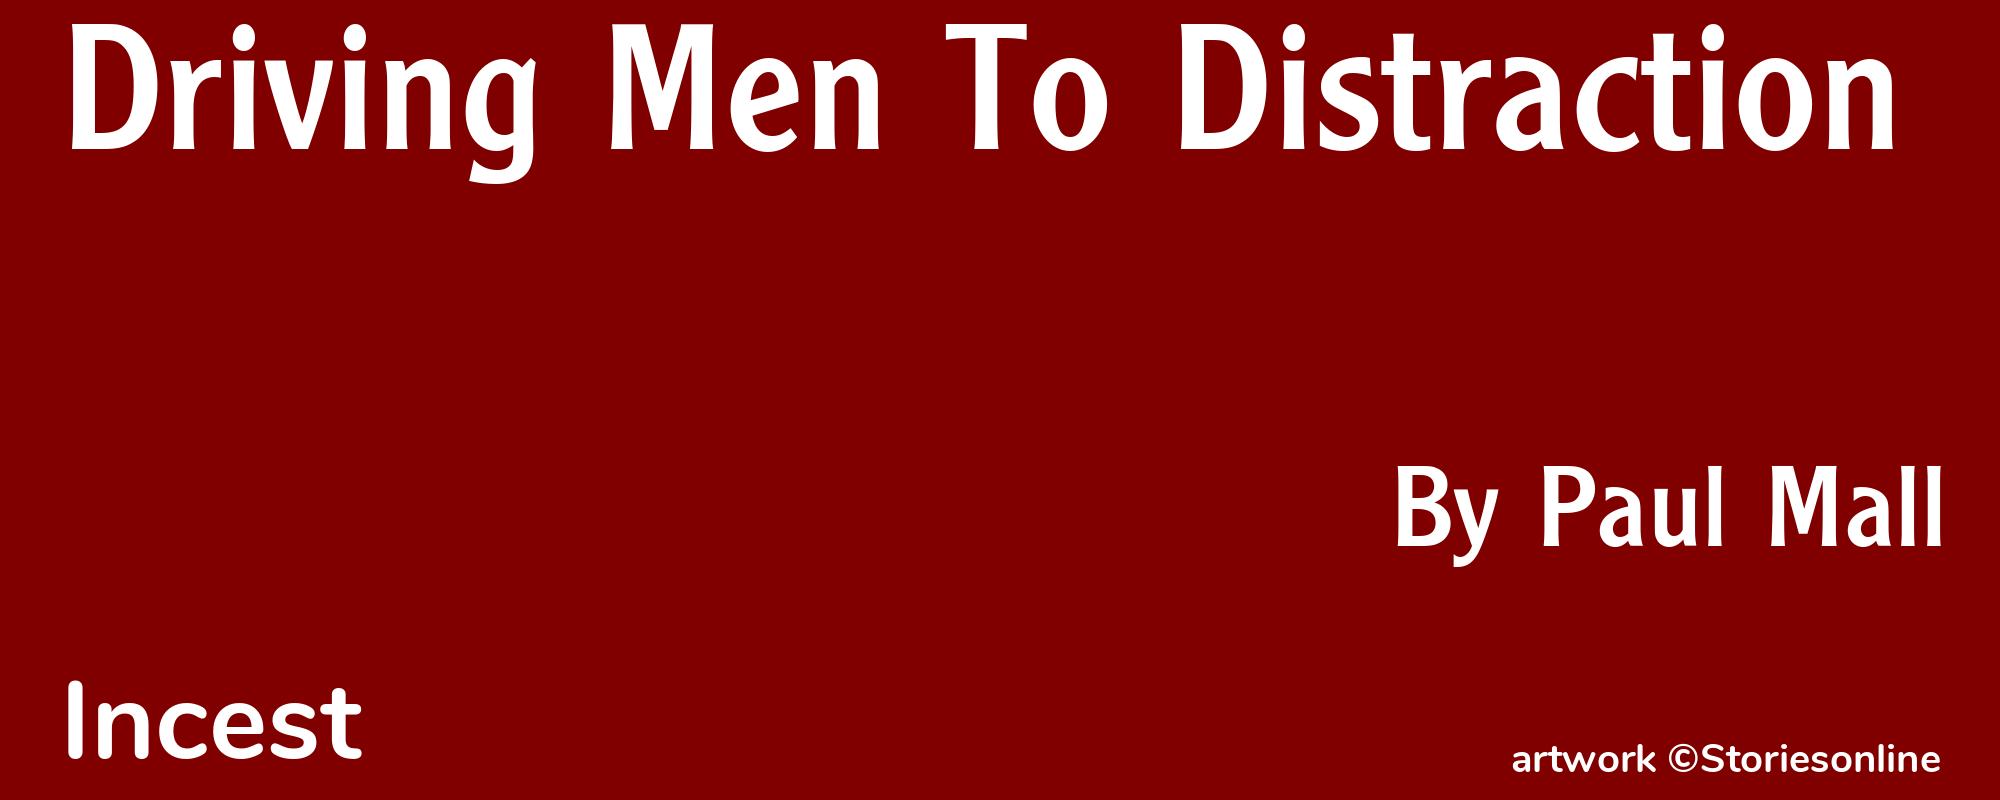 Driving Men To Distraction - Cover